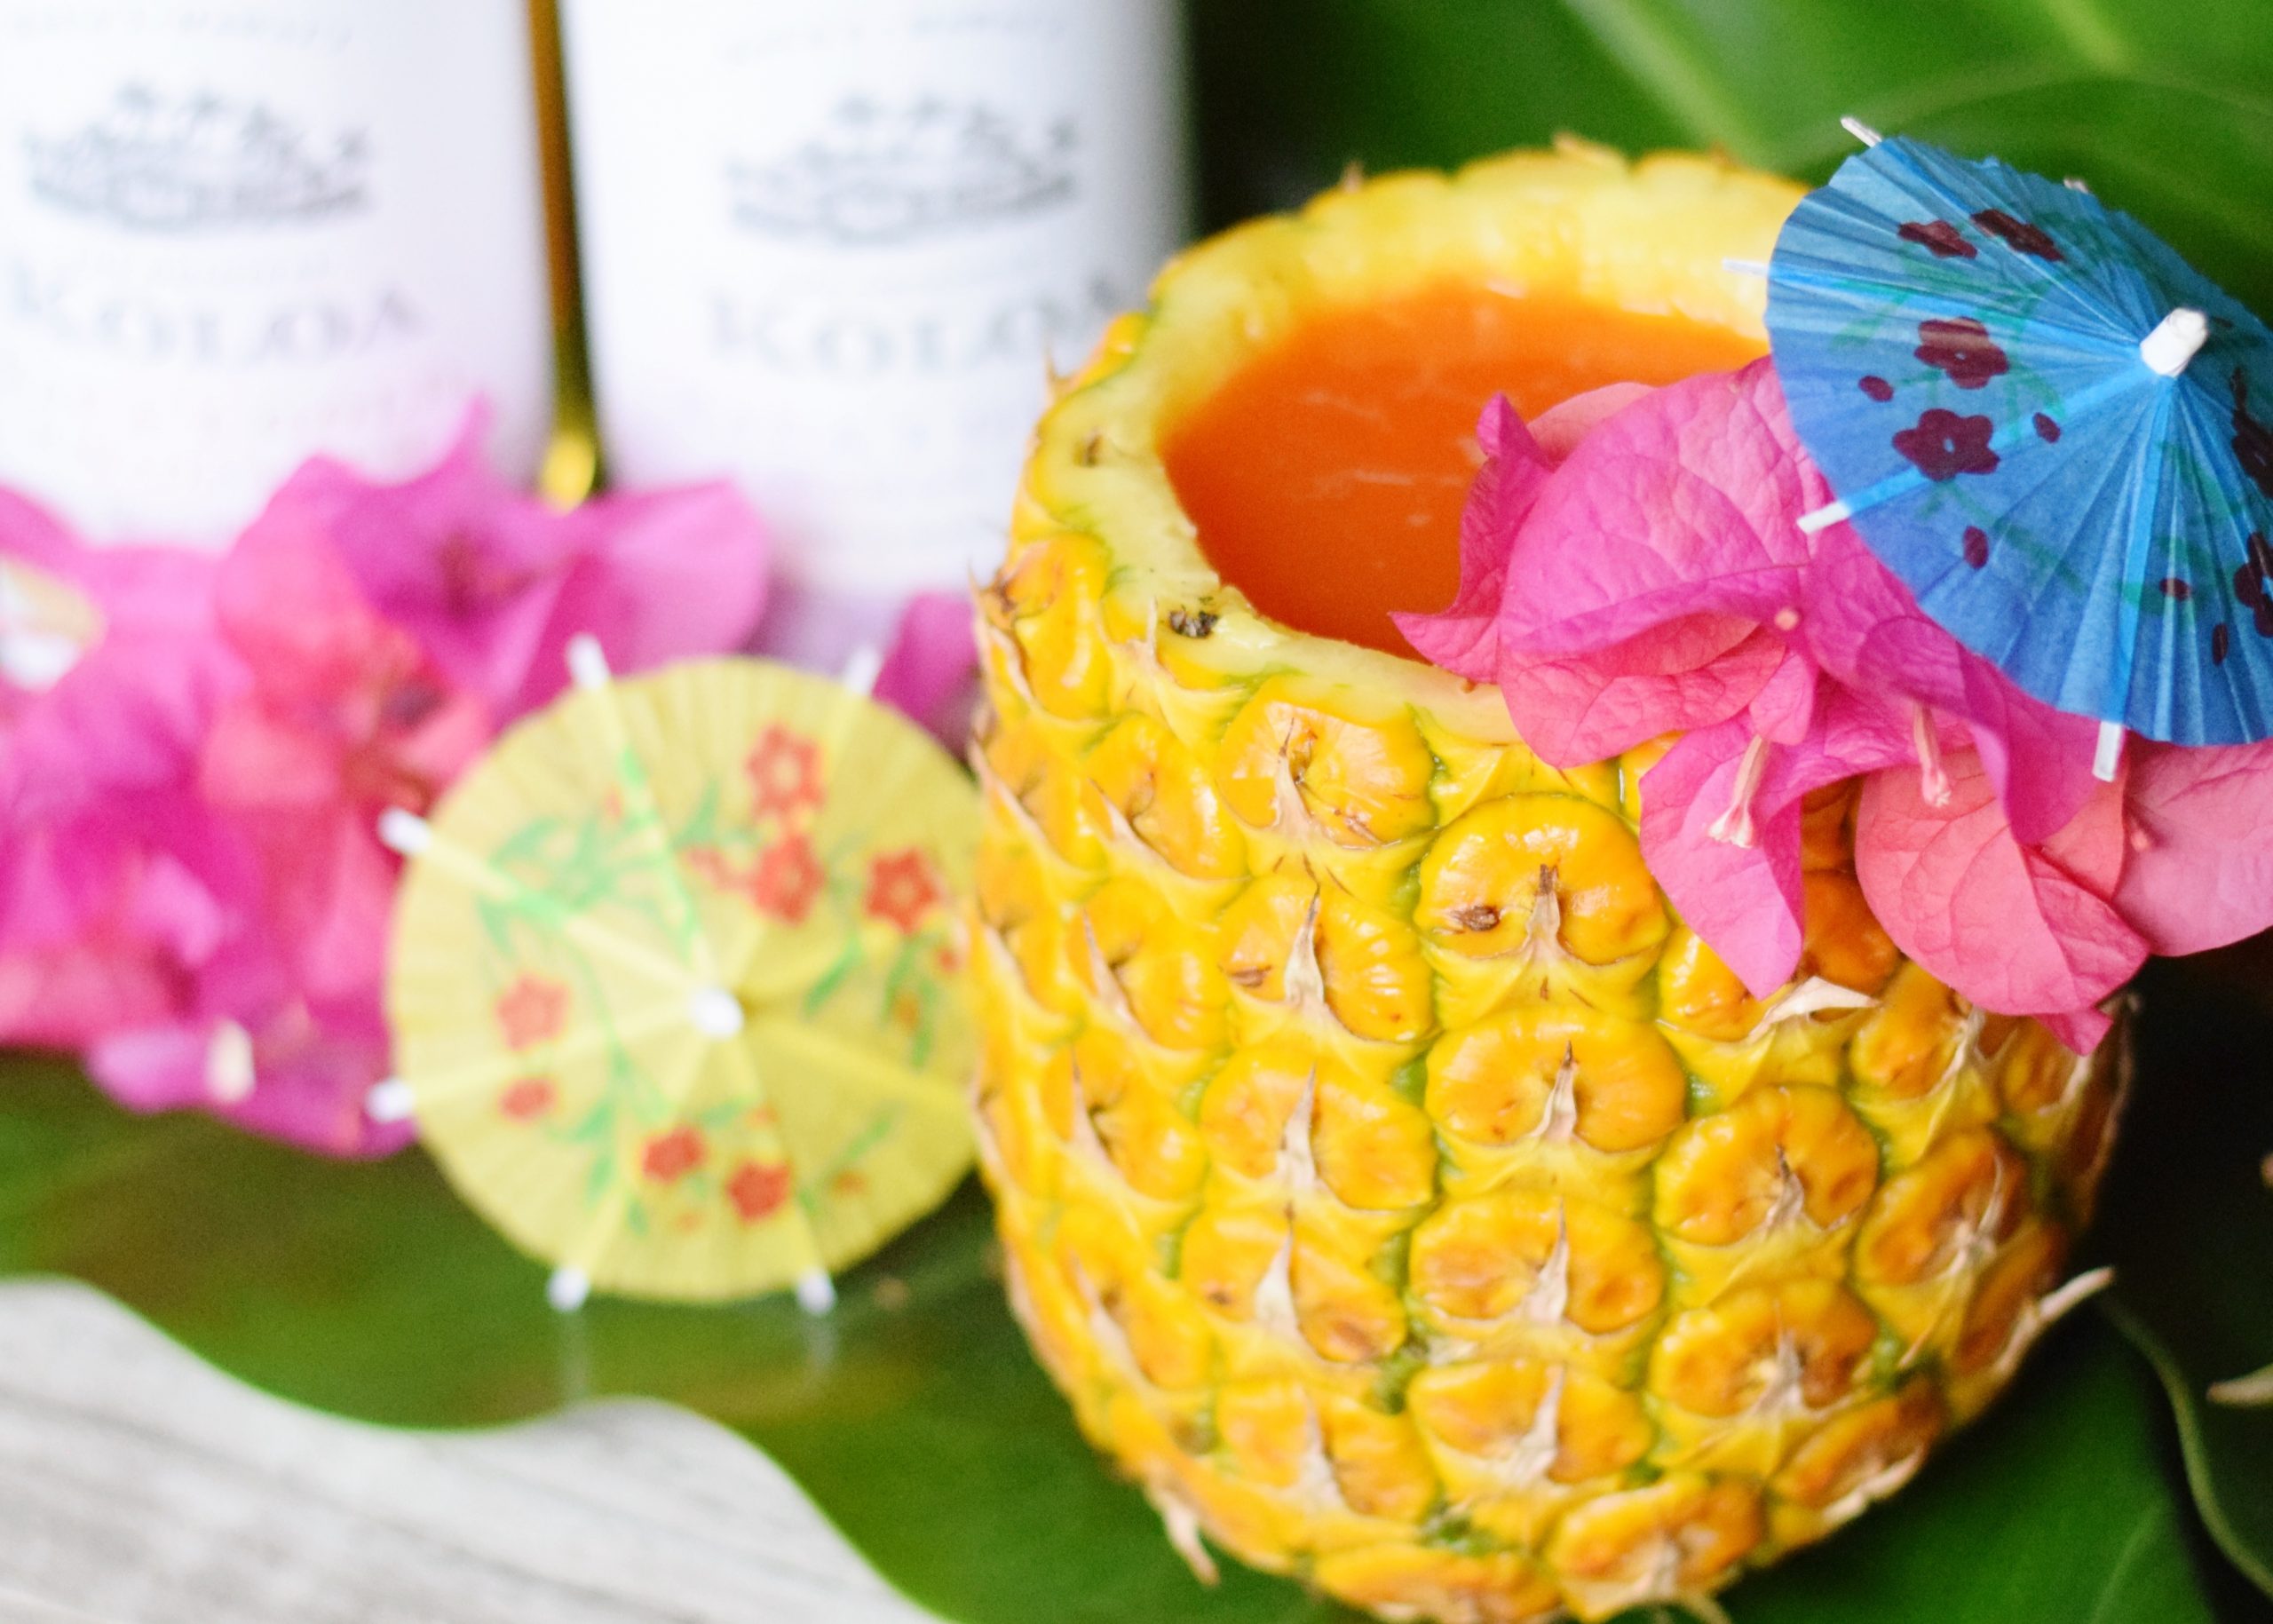 Pacific Painkiller Cocktail With Kōloa Rum - A delicious mix of tropical juices and three types of Kōloa Rum, makes this the ultimate painkiller cocktail recipe! - Painkiller Cocktail Recipe - Painkiller Cocktail - Kōloa Rum - Kōloa Rum cocktail idea - Hawaii Tropical cocktail - Cocktail served in a pineapple 